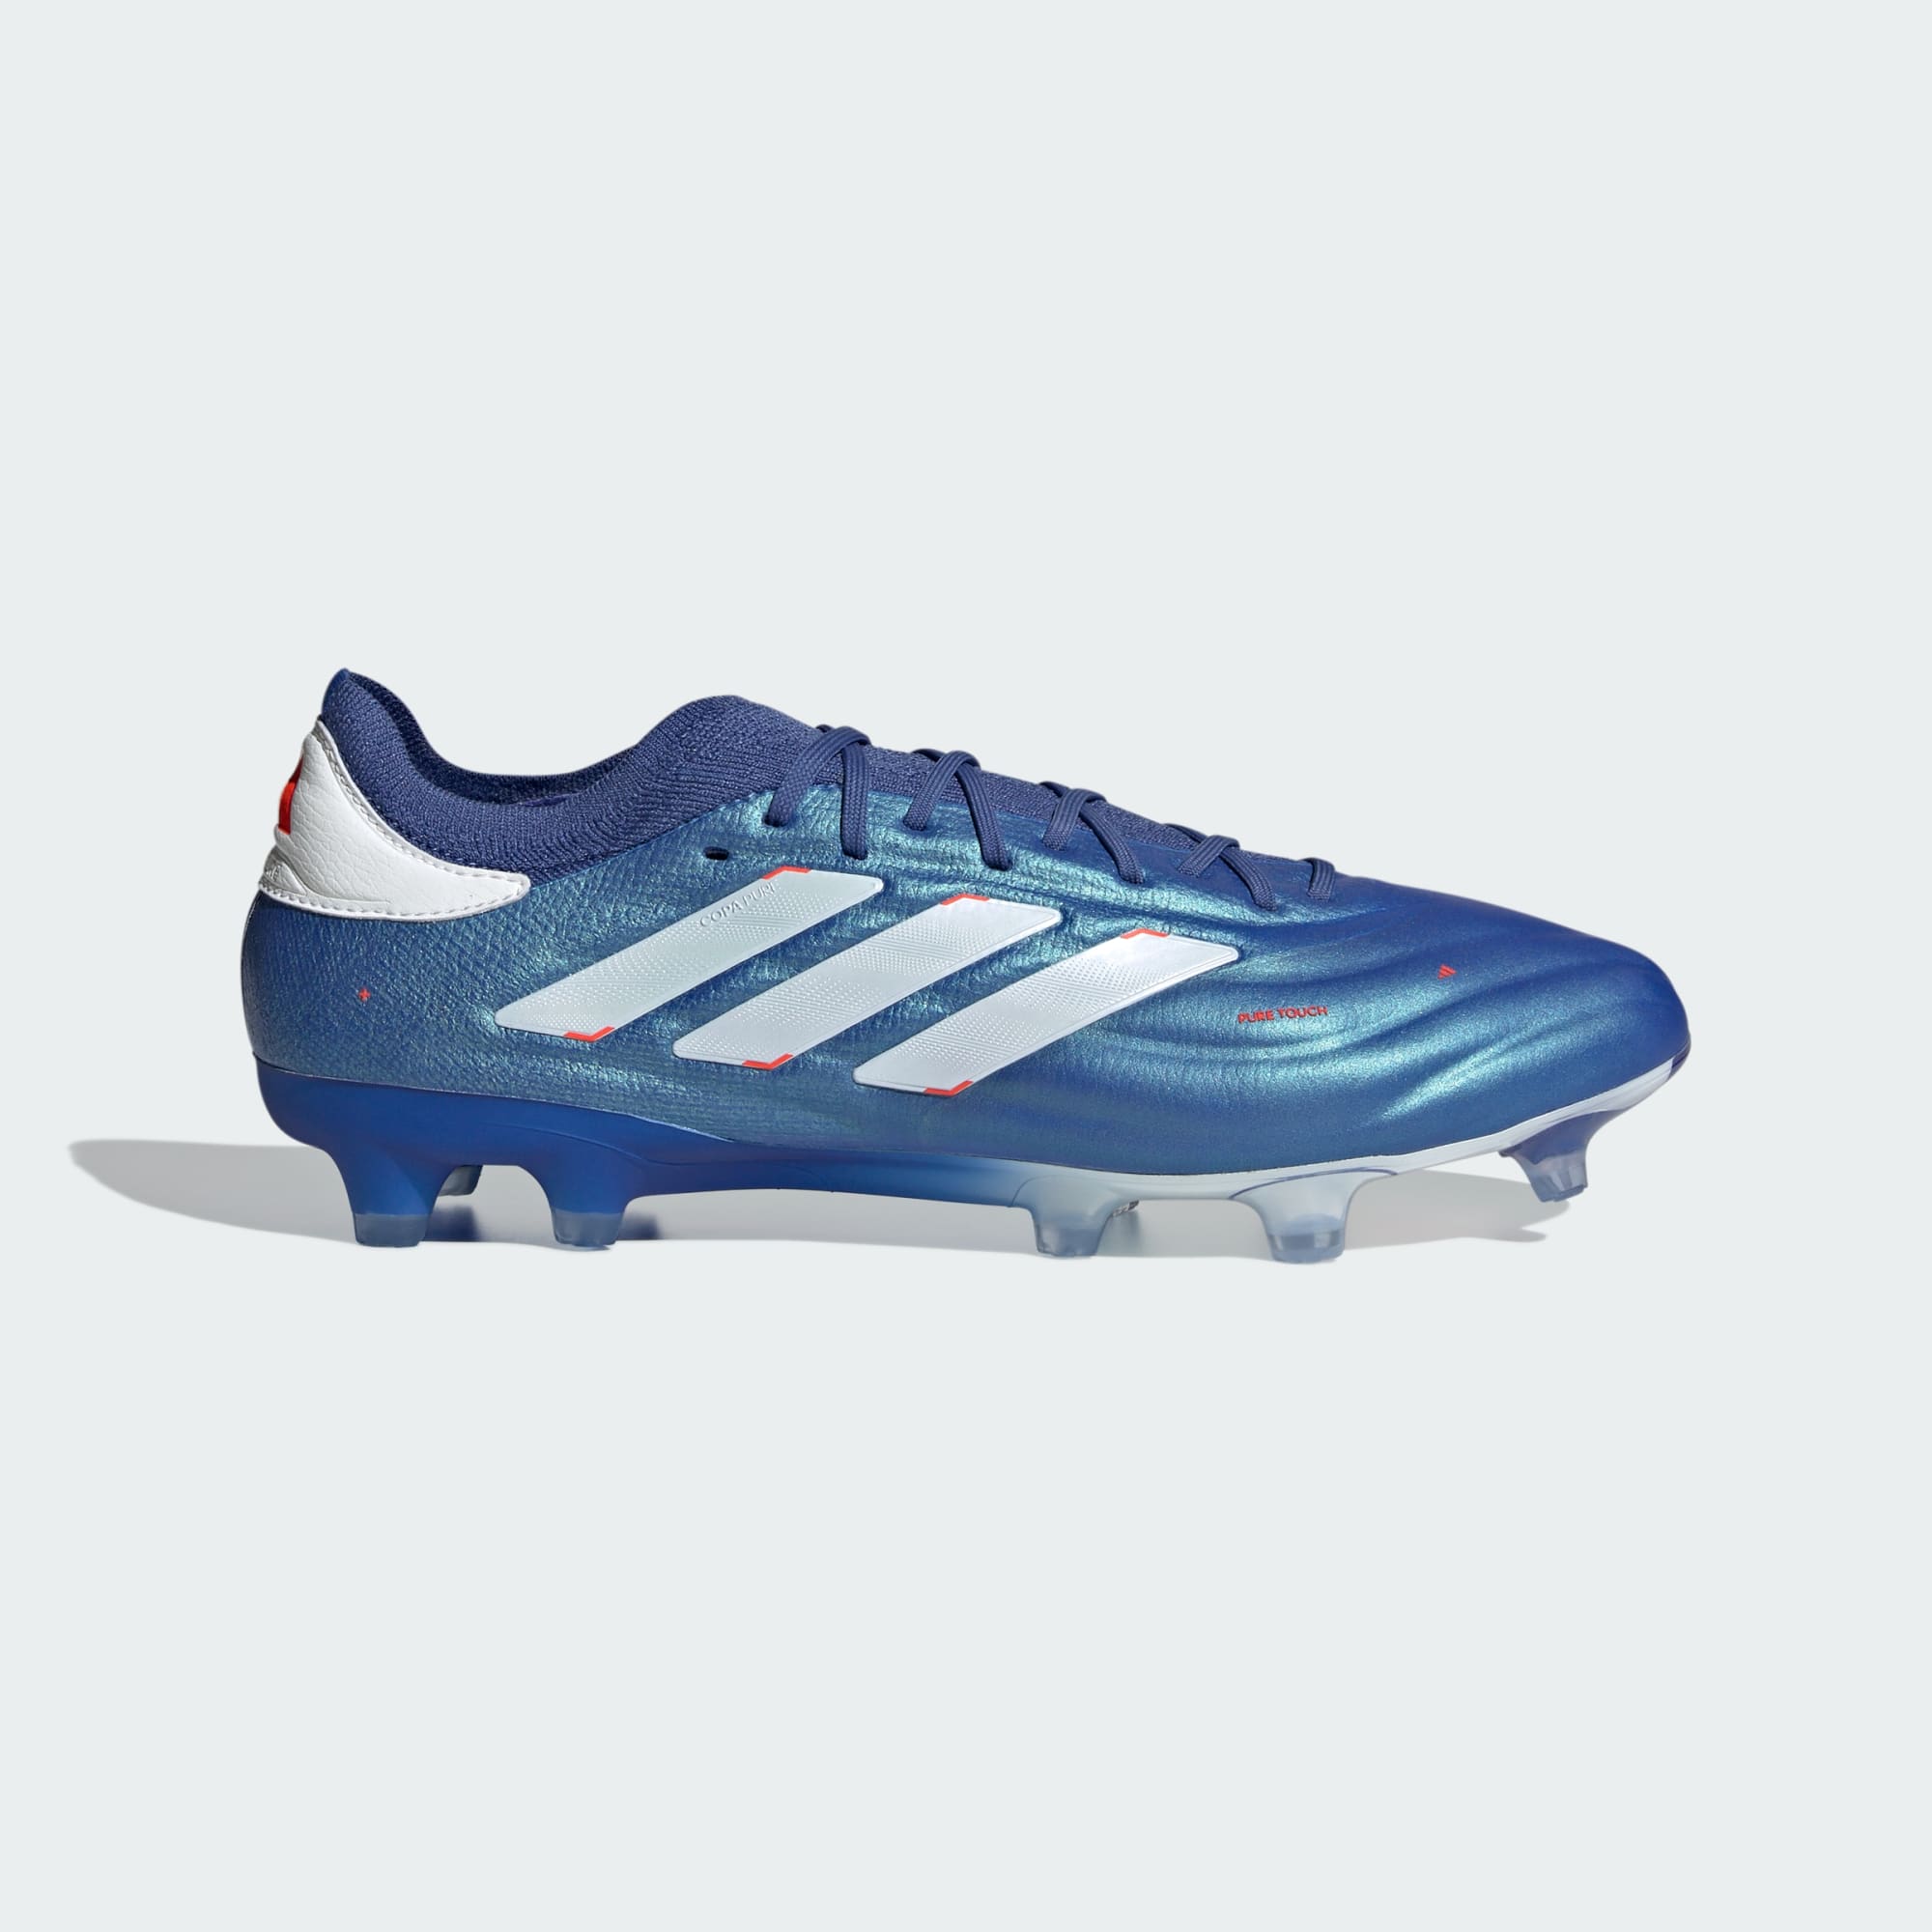 adidas COPA PURE II+ FIRM GROUND SOCCER CLEATS